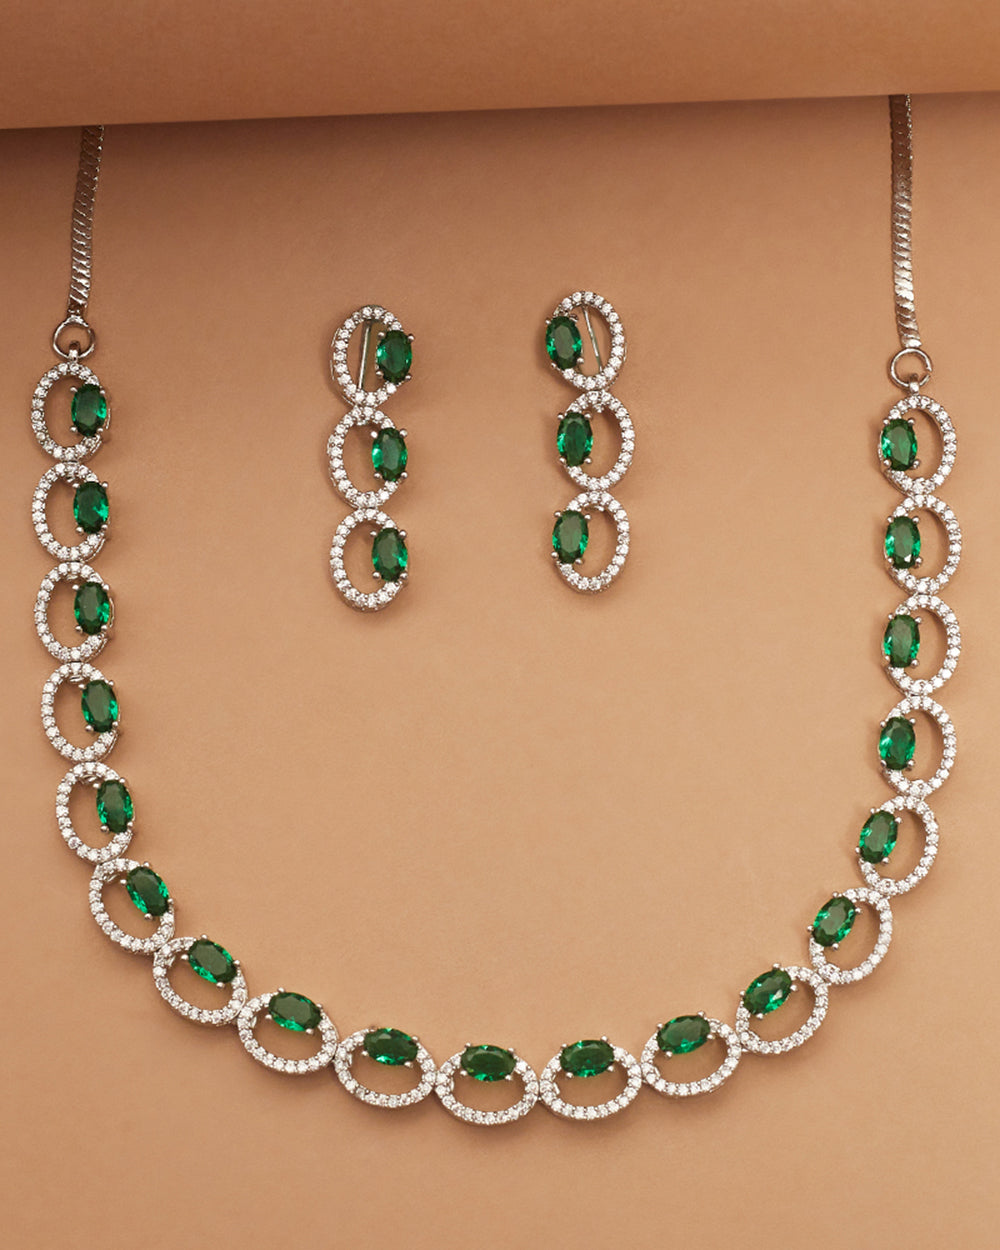 Women's Elegance Collection Necklace With Green And Silver Gems - Voylla